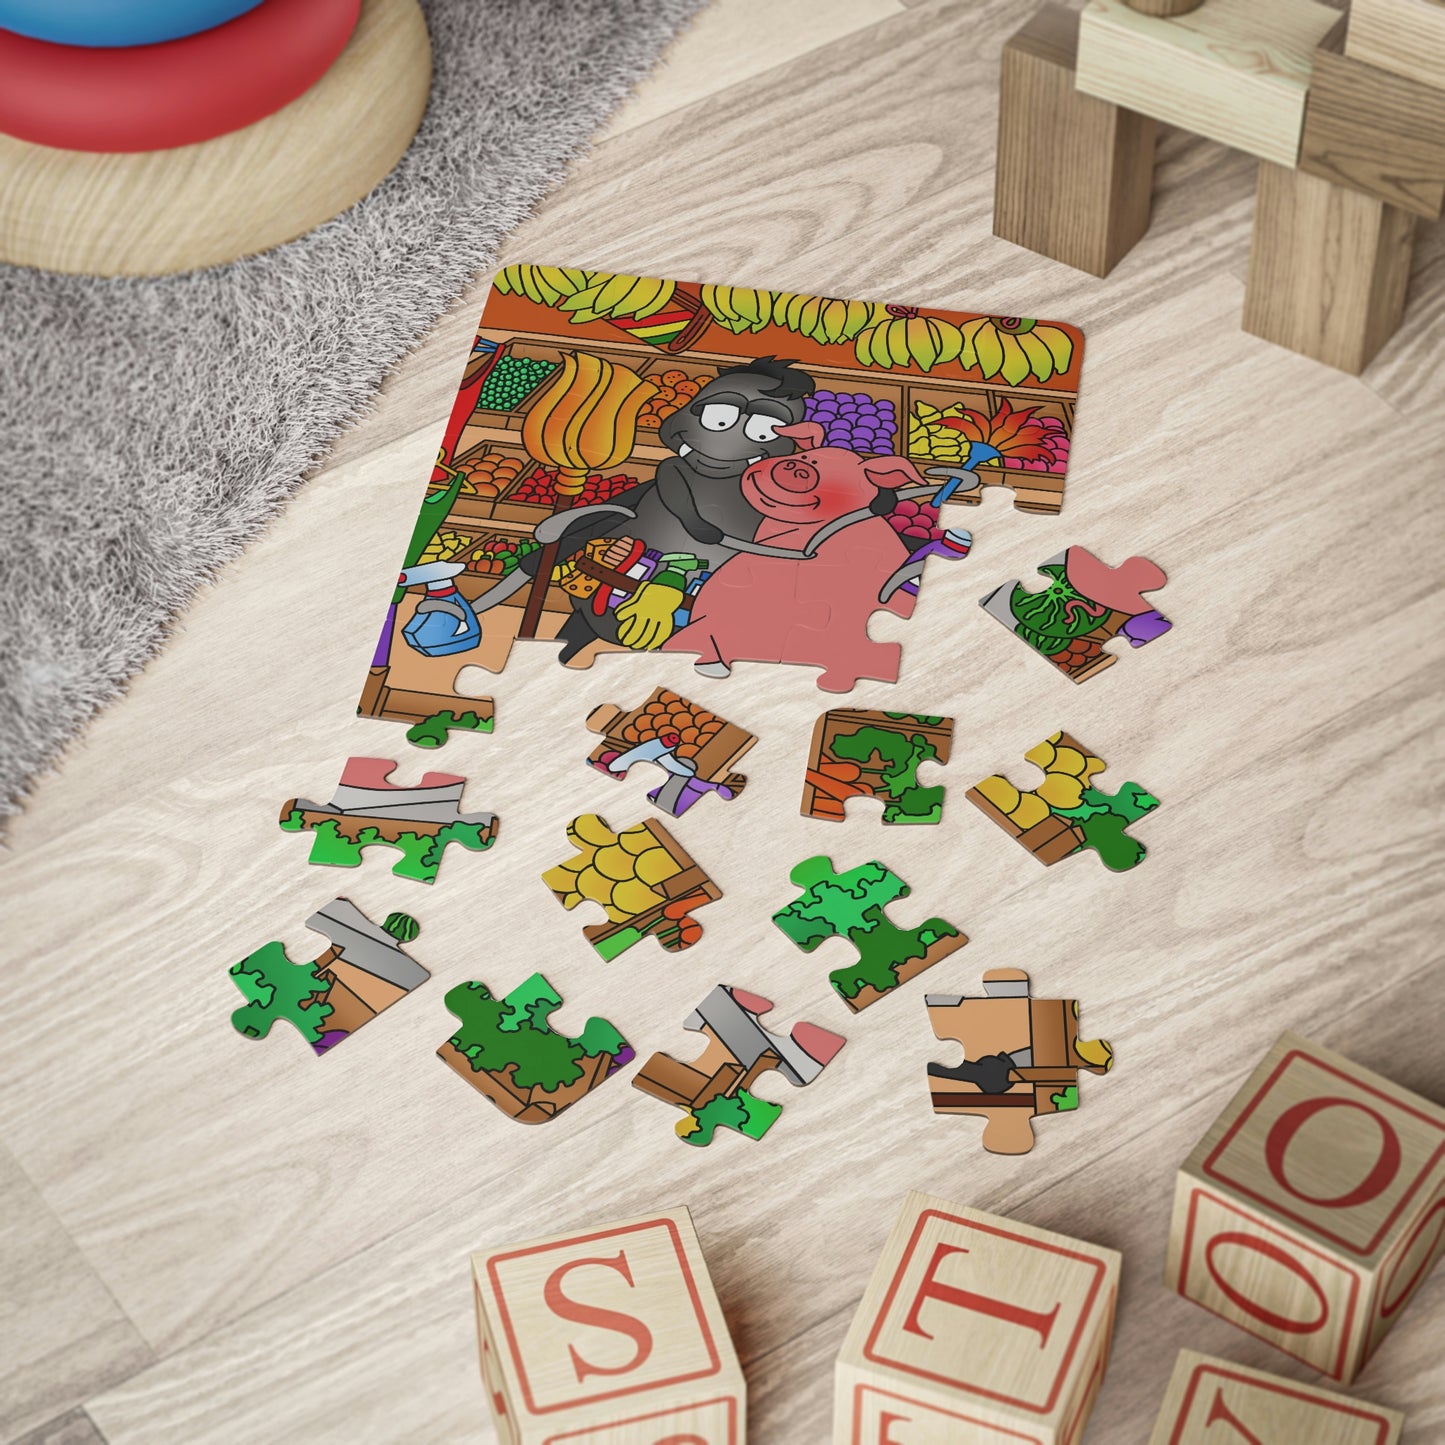 Anansi and the Market Pig Kids' Puzzle, 30-Piece